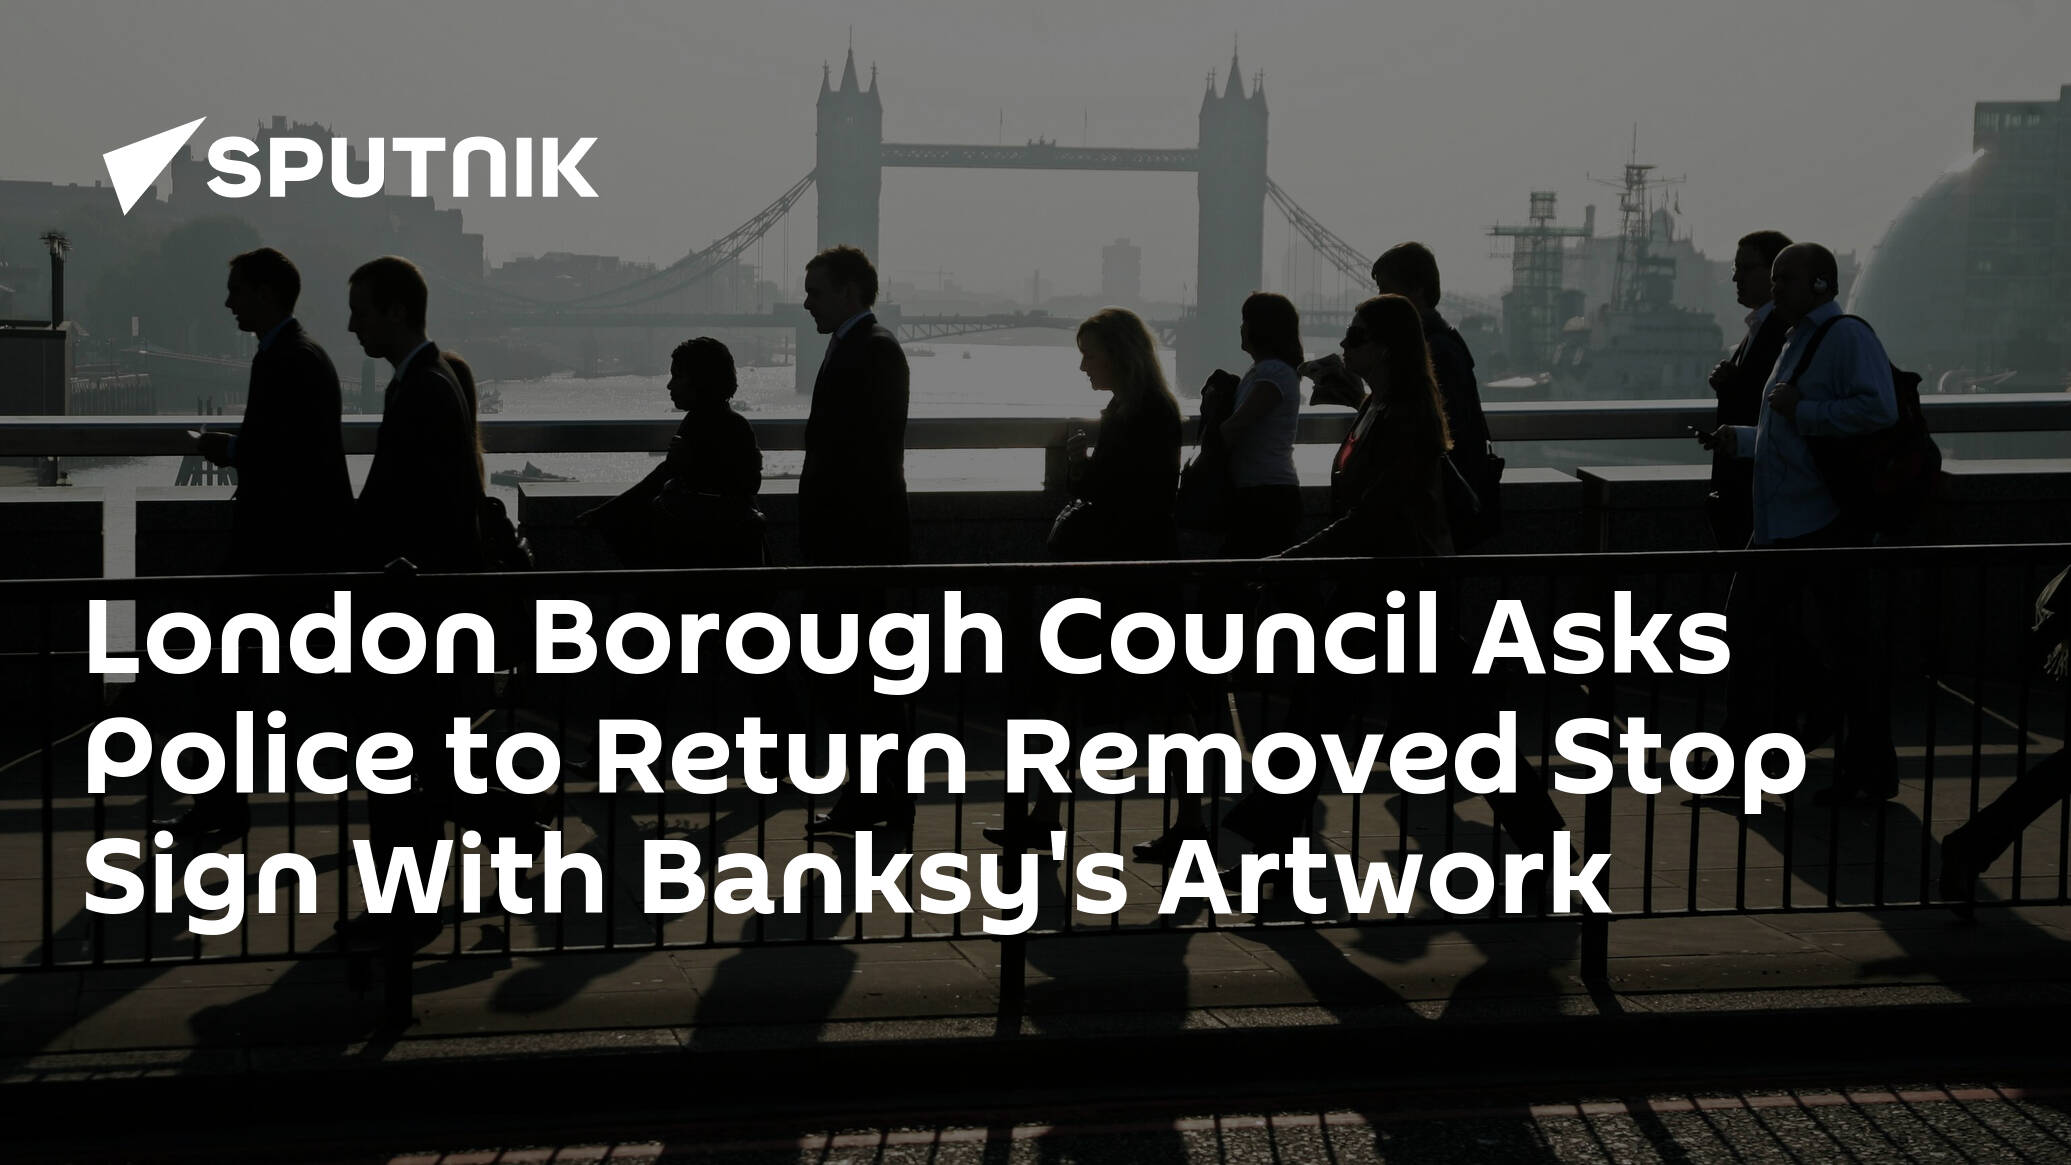 London Borough Council Asks Police to Return Removed Stop Sign With Banksy's Artwork